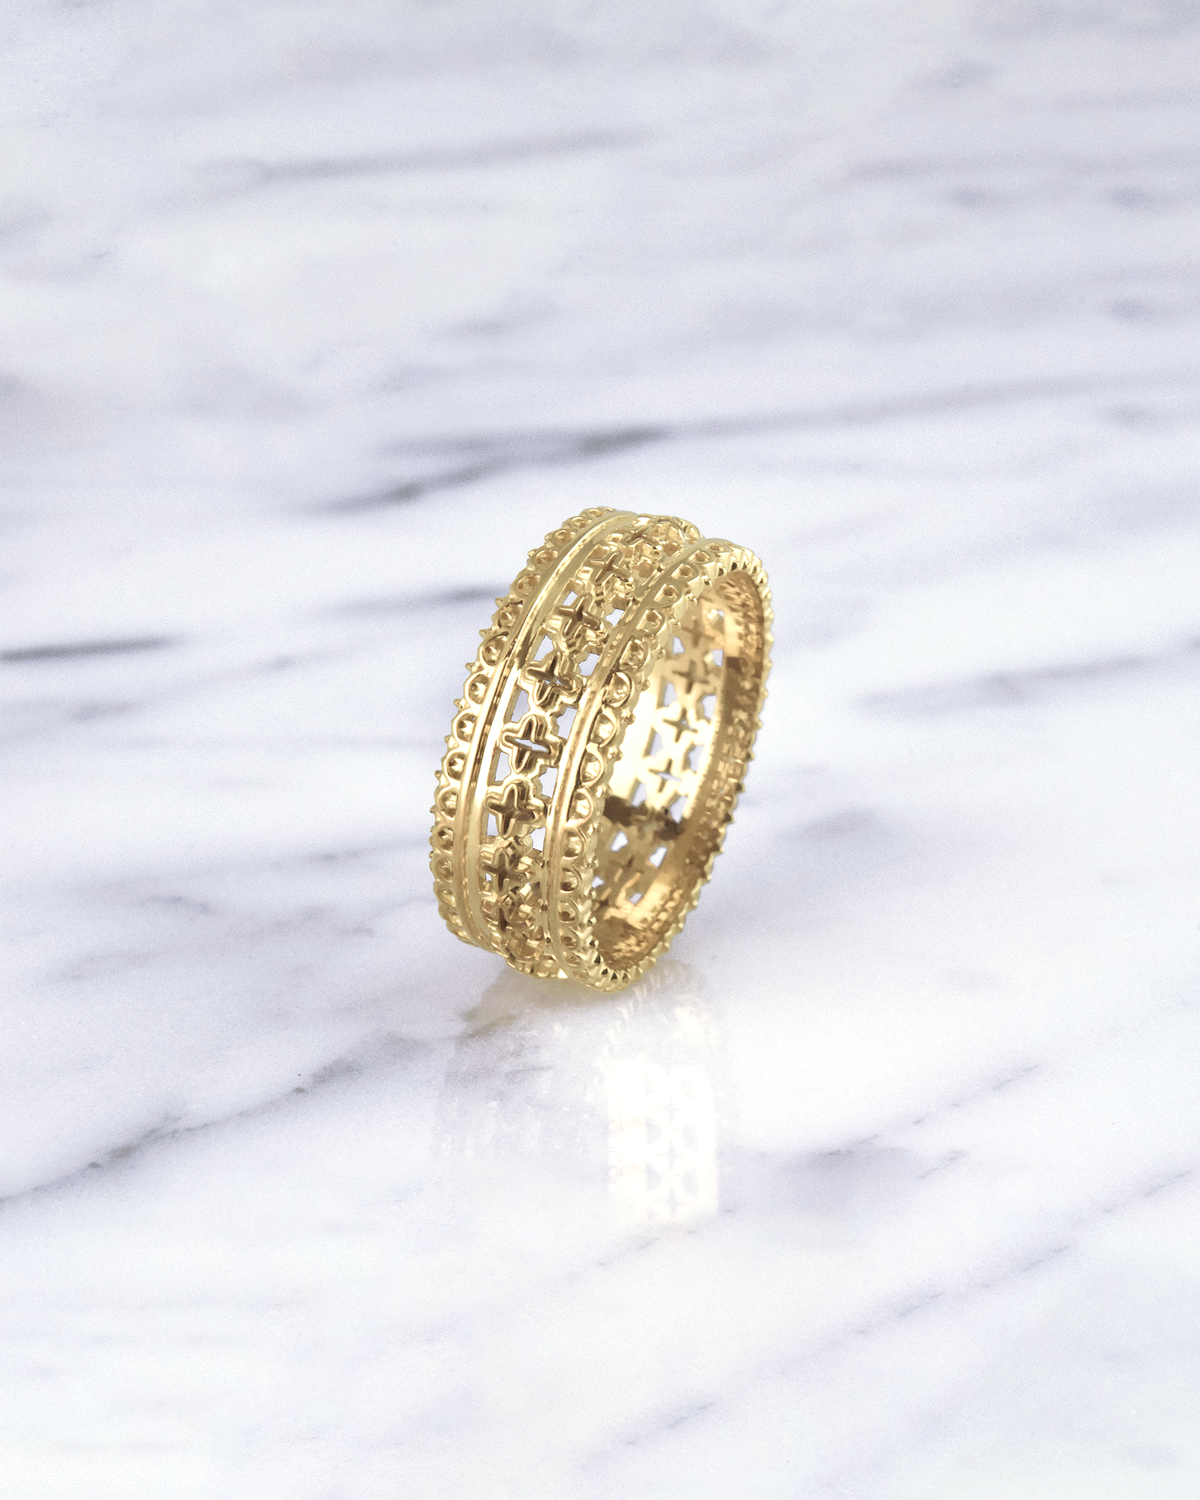 Sol Invictus Ring - 14k Yellow Gold - Designed and Made in Montreal, Quebec